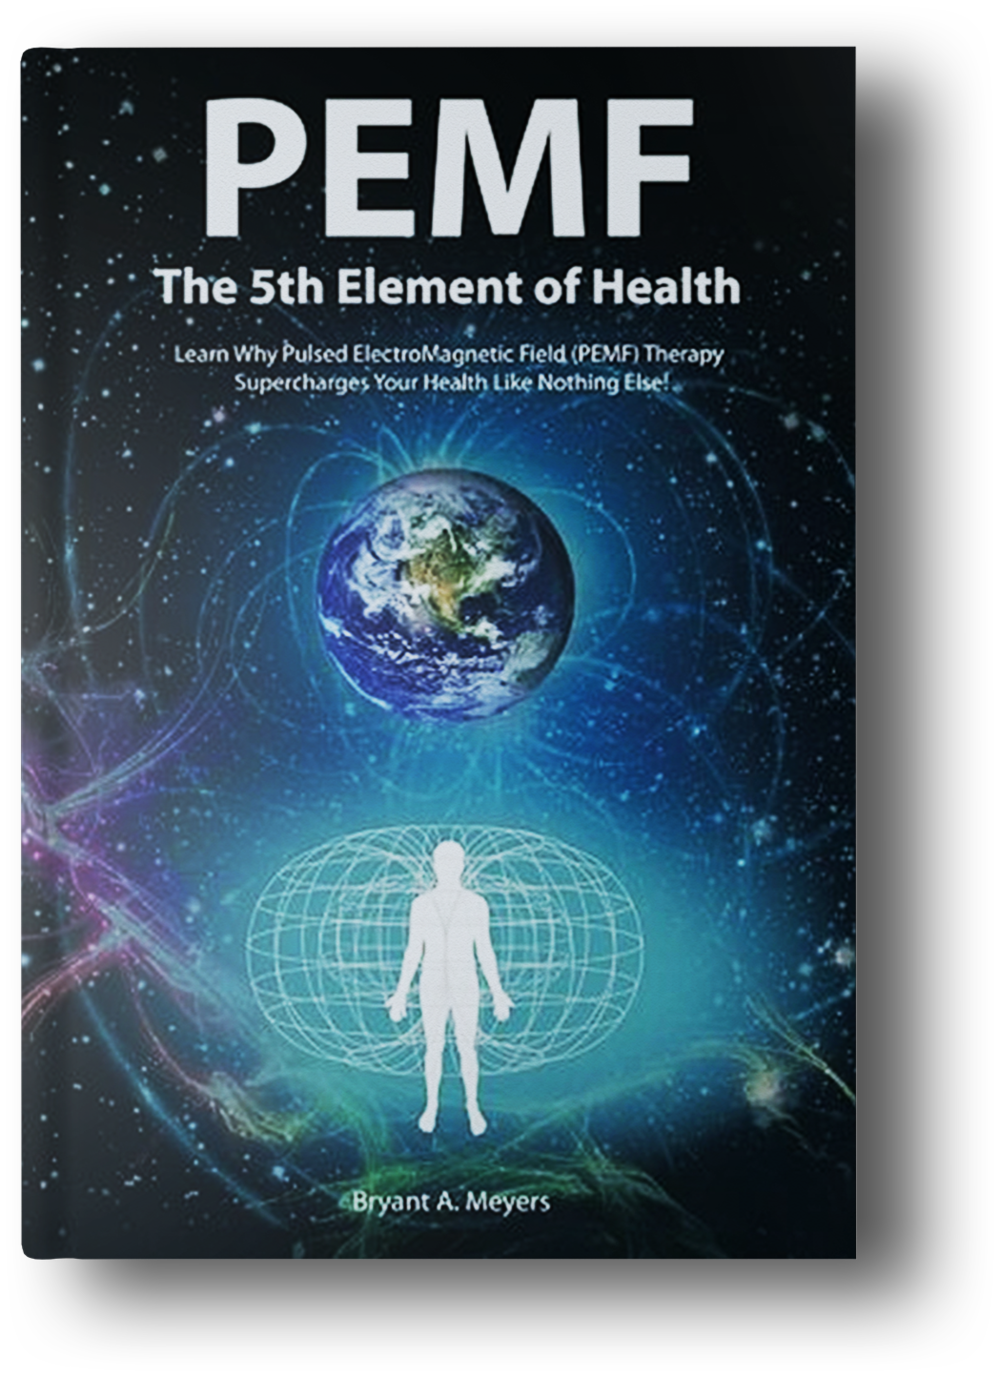 https://pemfbook.com/wp-content/uploads/2021/02/05Book-PEMF-TheFifthElementofHealth.png